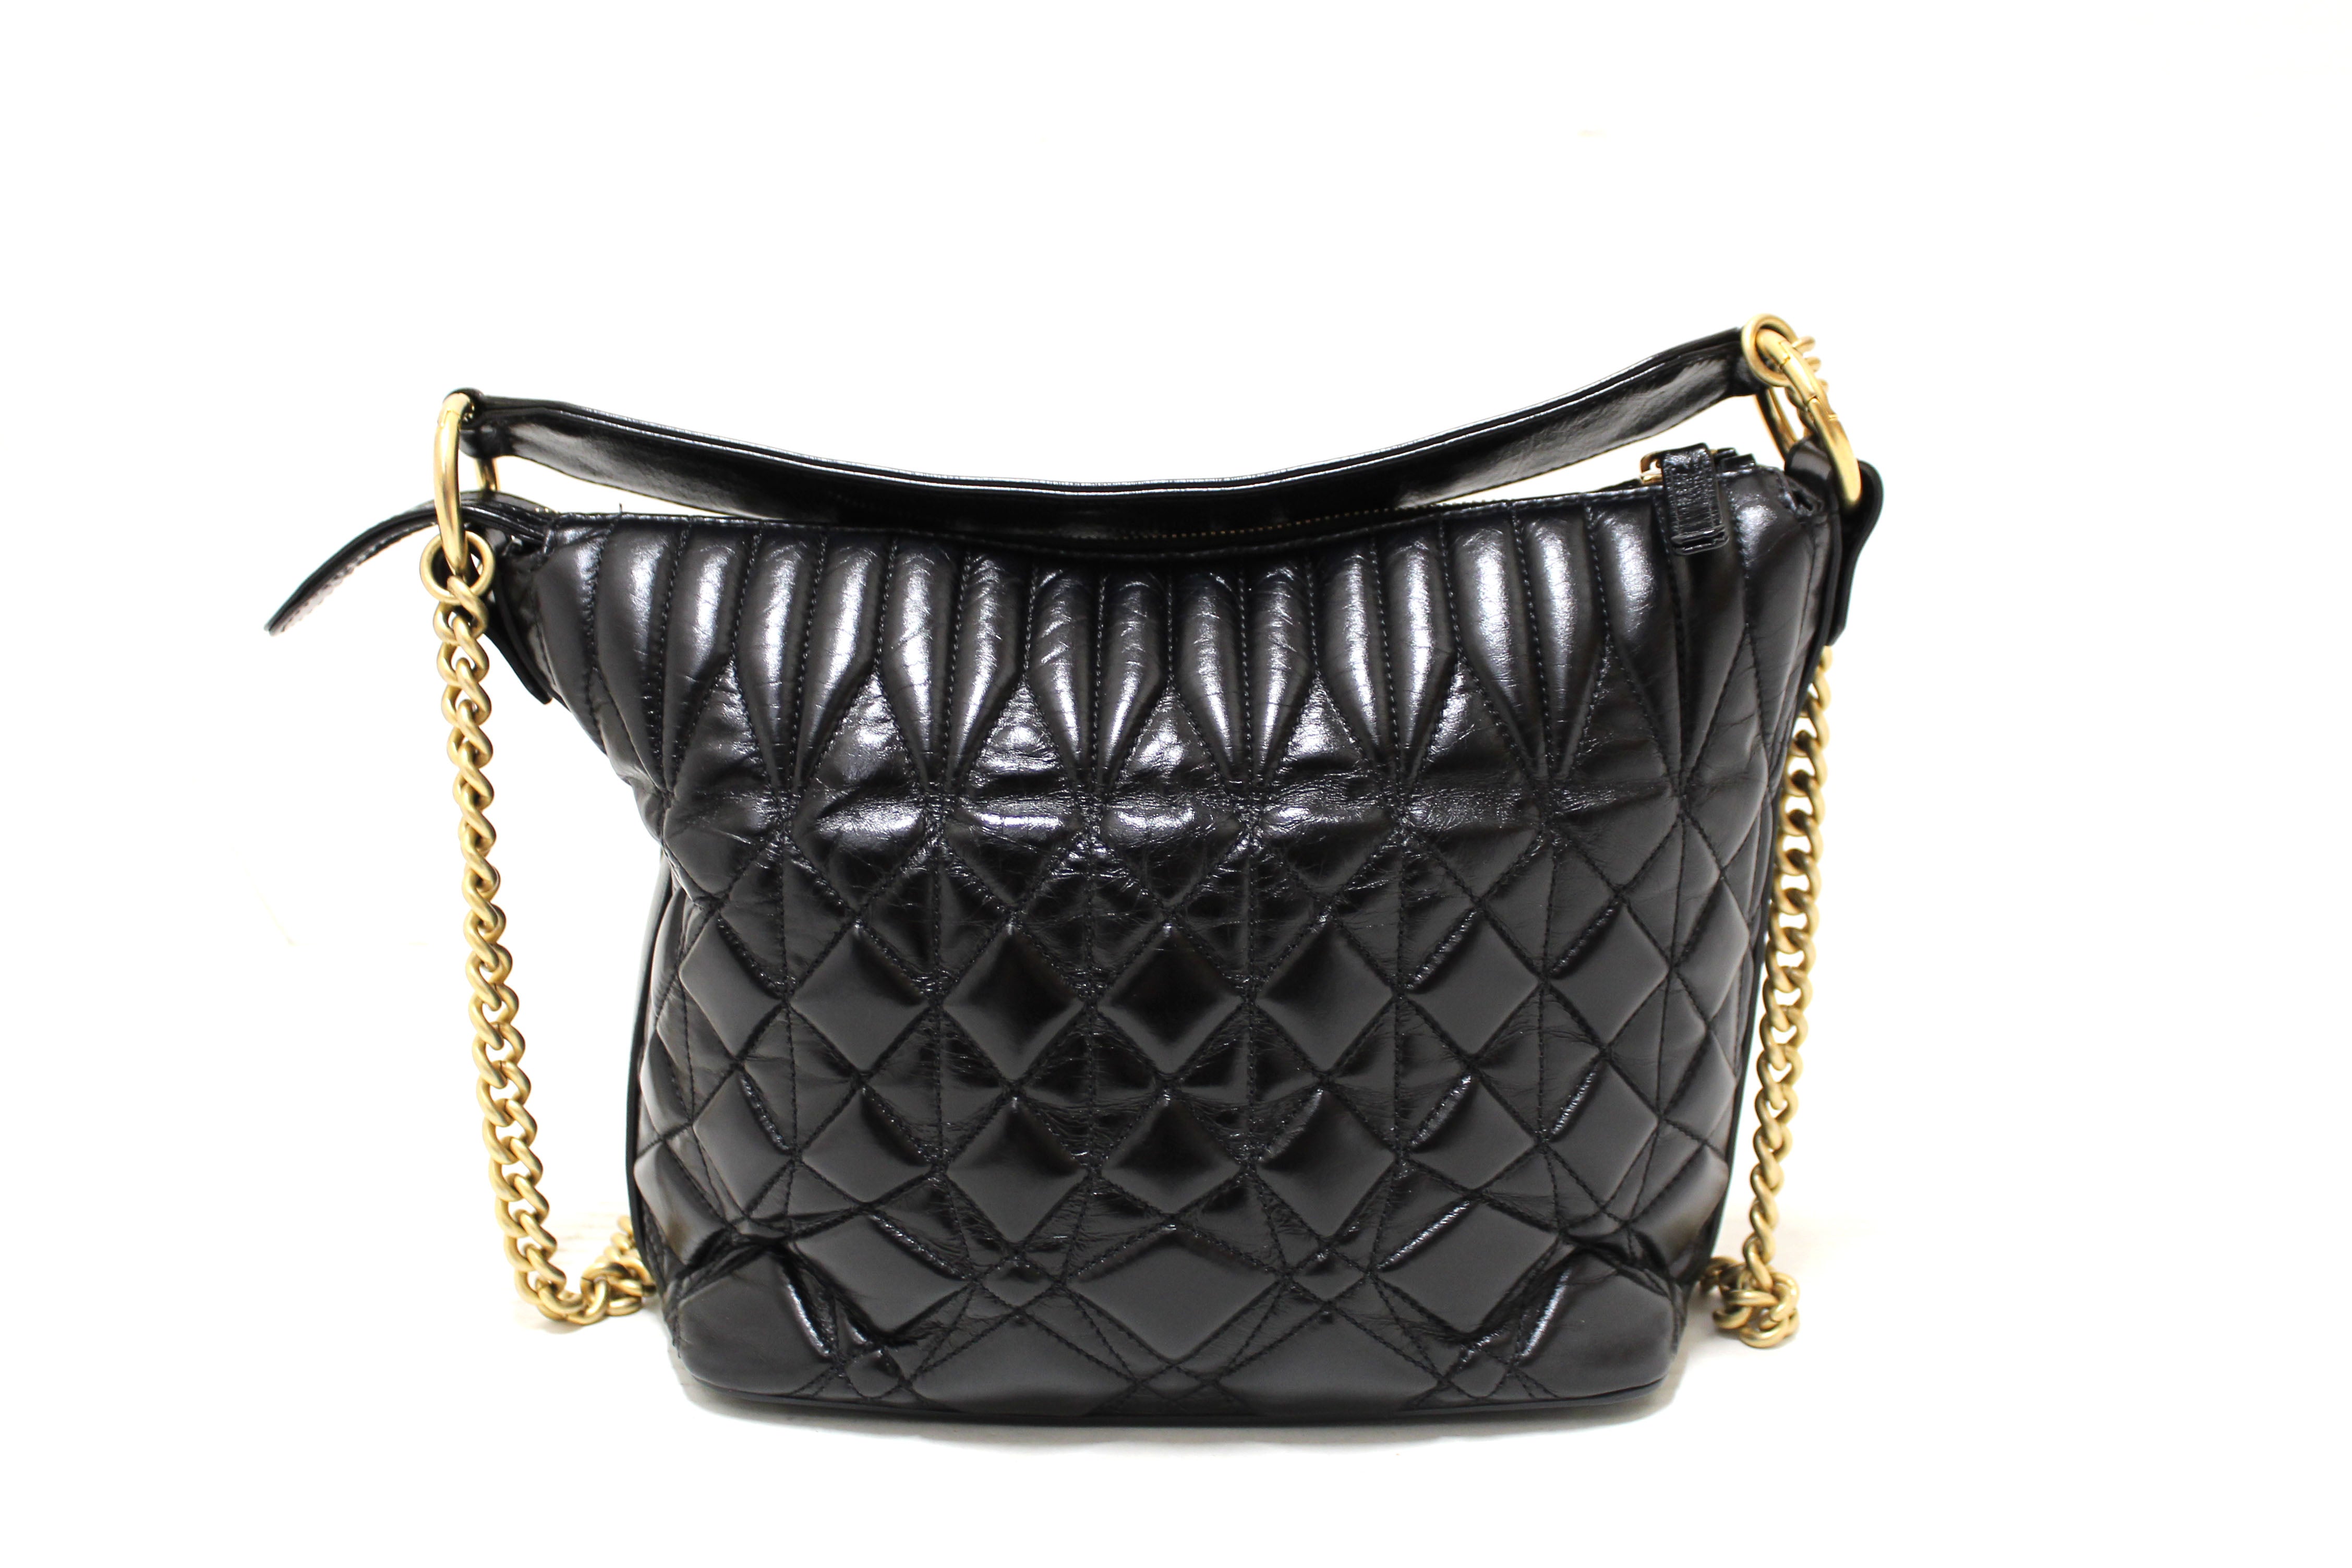 Authentic Chanel Black Quilted Calfskin Leather State of The Art Hobo Bag